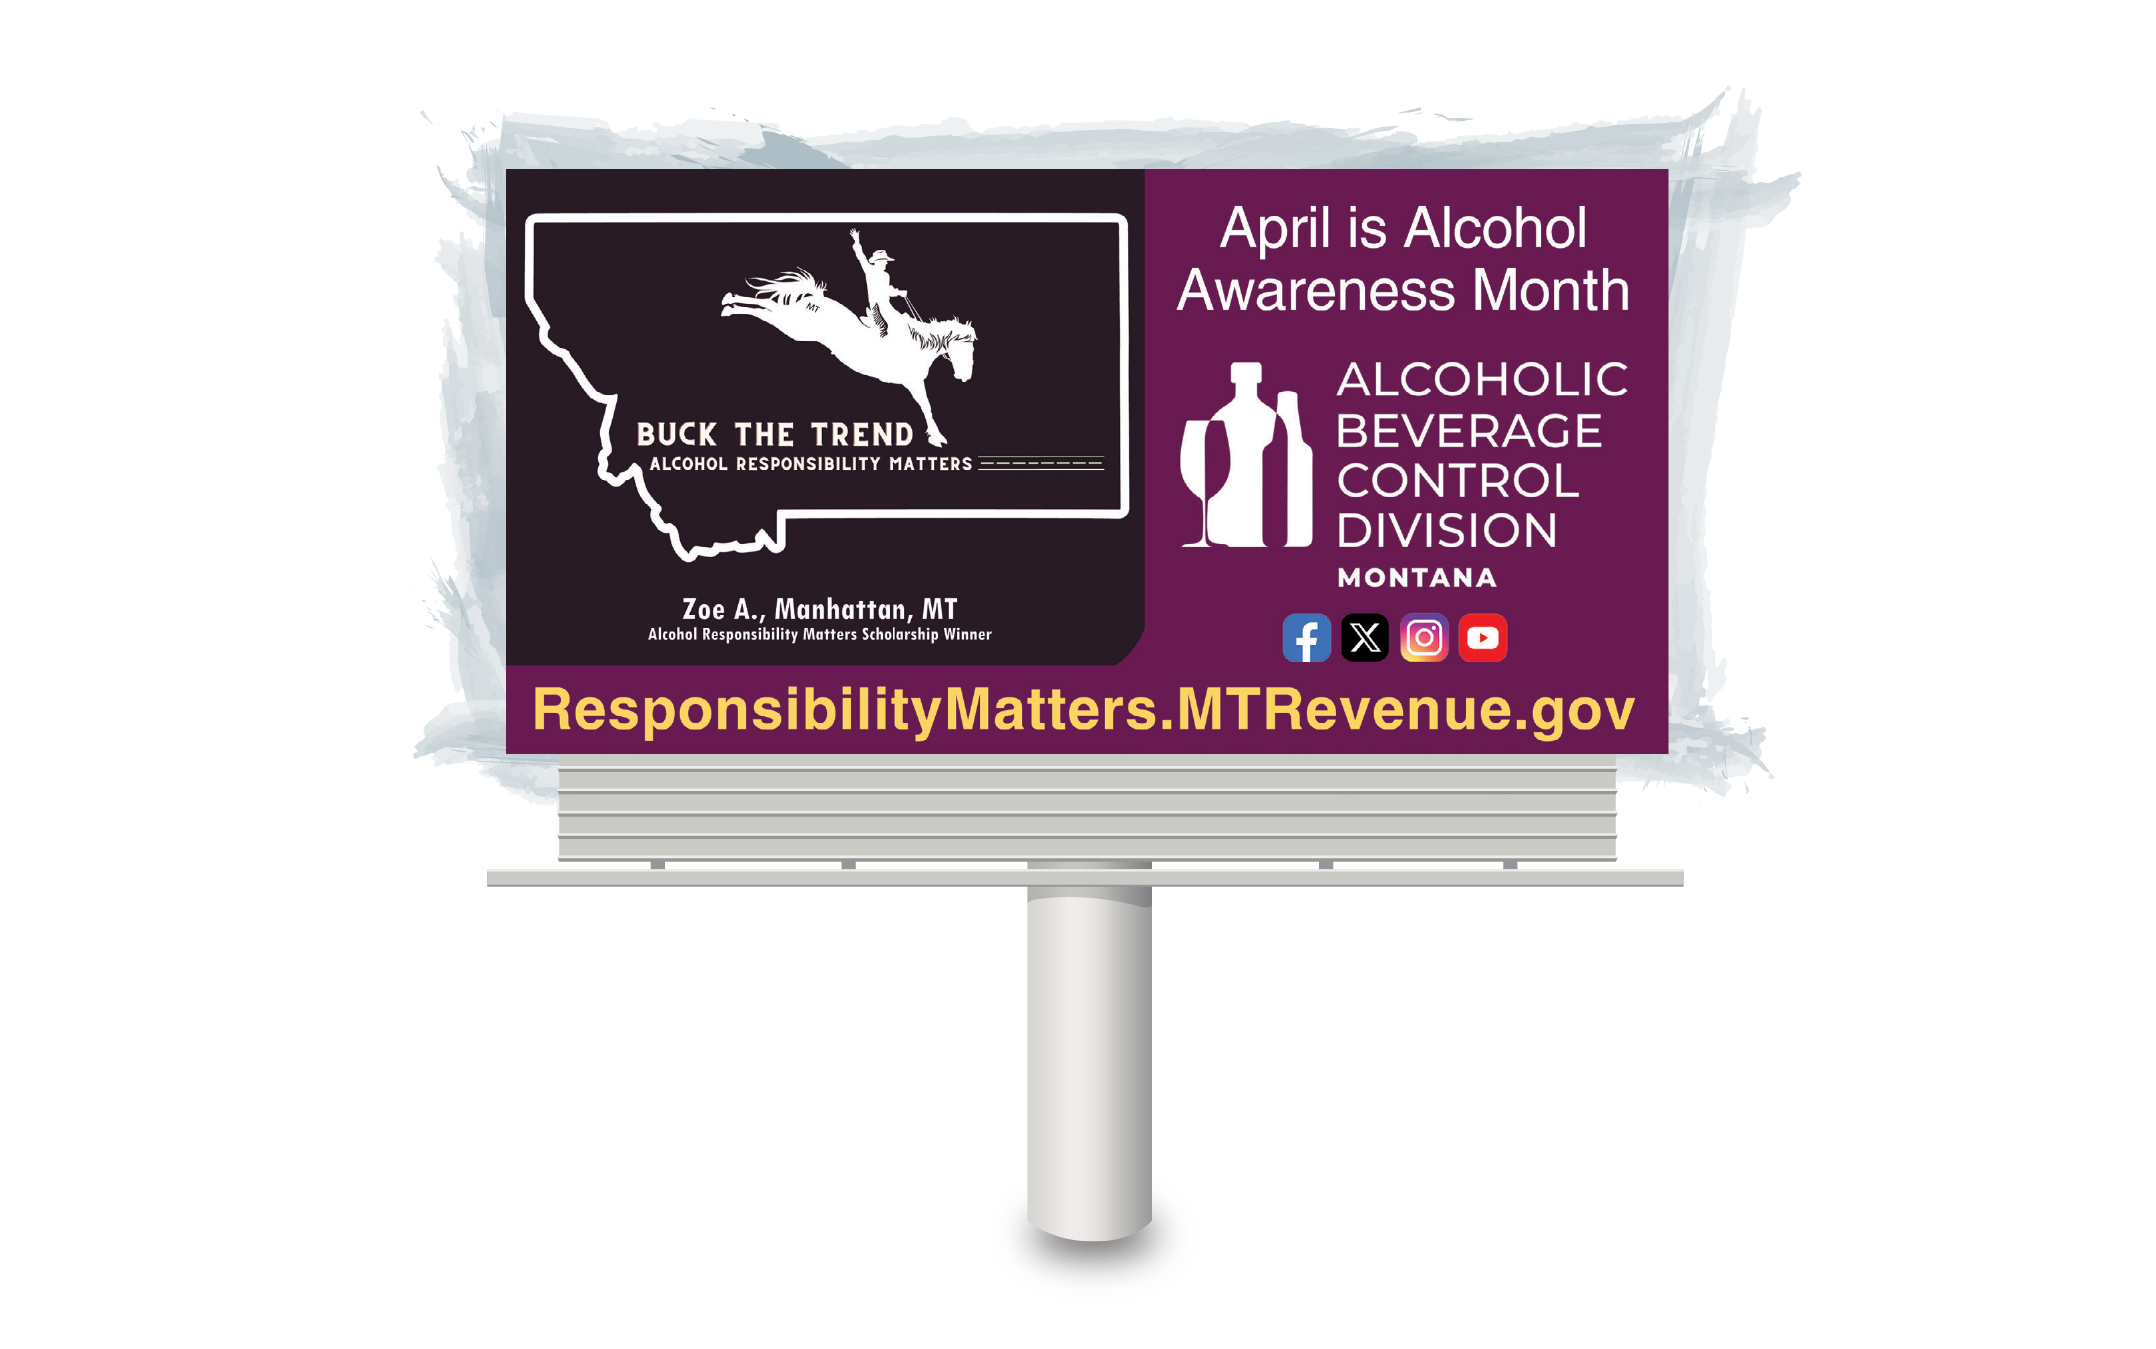 A billboard with a bucking horse silhouette and the outline of Montana with the text "BUCK THE TREND – ALCOHOL RESPONSIBILITY MATTERS," and a mention of a scholarship winner, Zoe A. from Manhattan, MT.